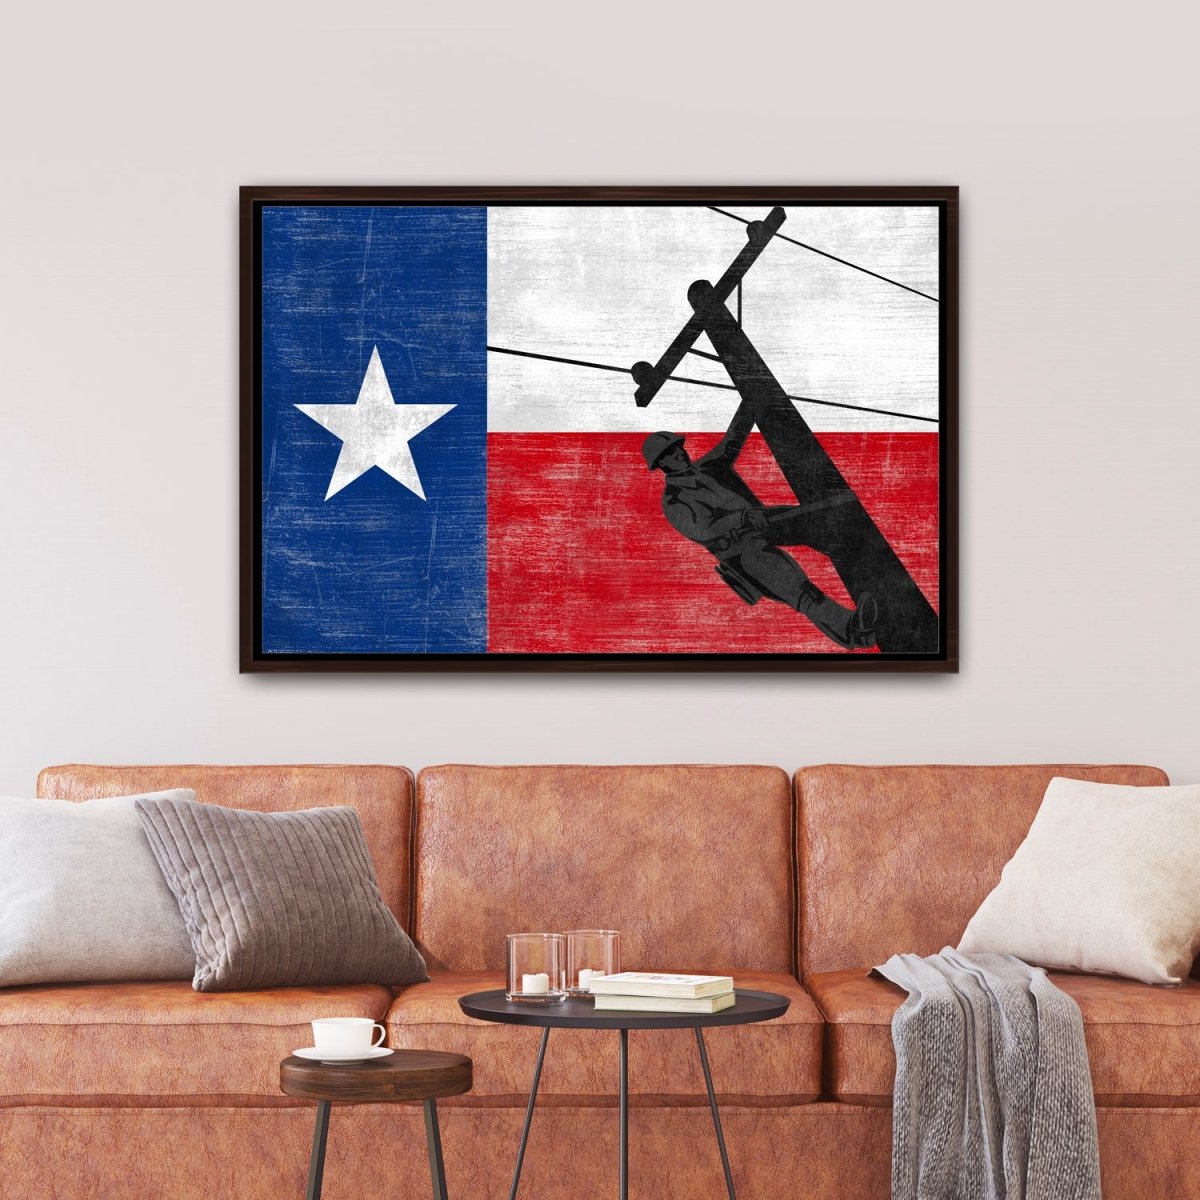 Texas Lineman Wall Art in Living Room Above Couch - Pretty Perfect Studio